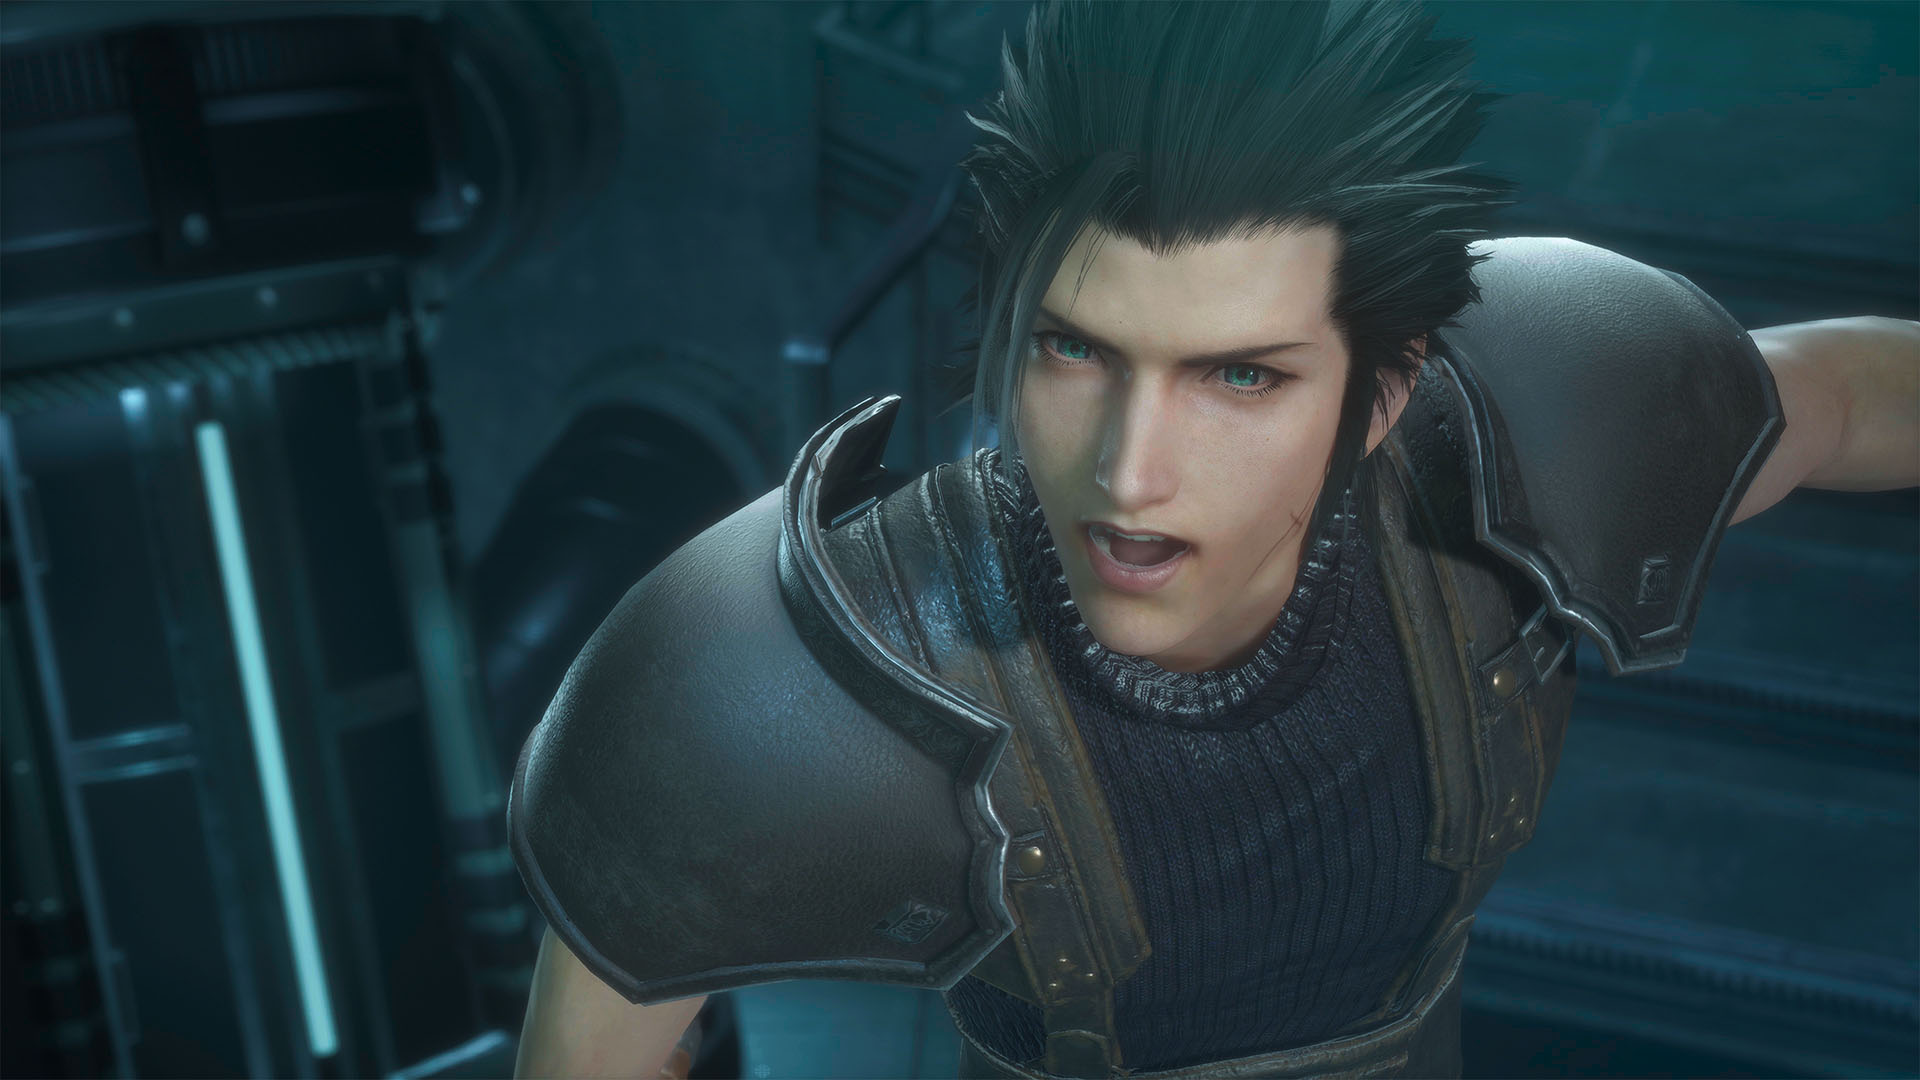 Crisis Core Final Fantasy VII Reunion Has Me Gripped So Far. Hands On Preview